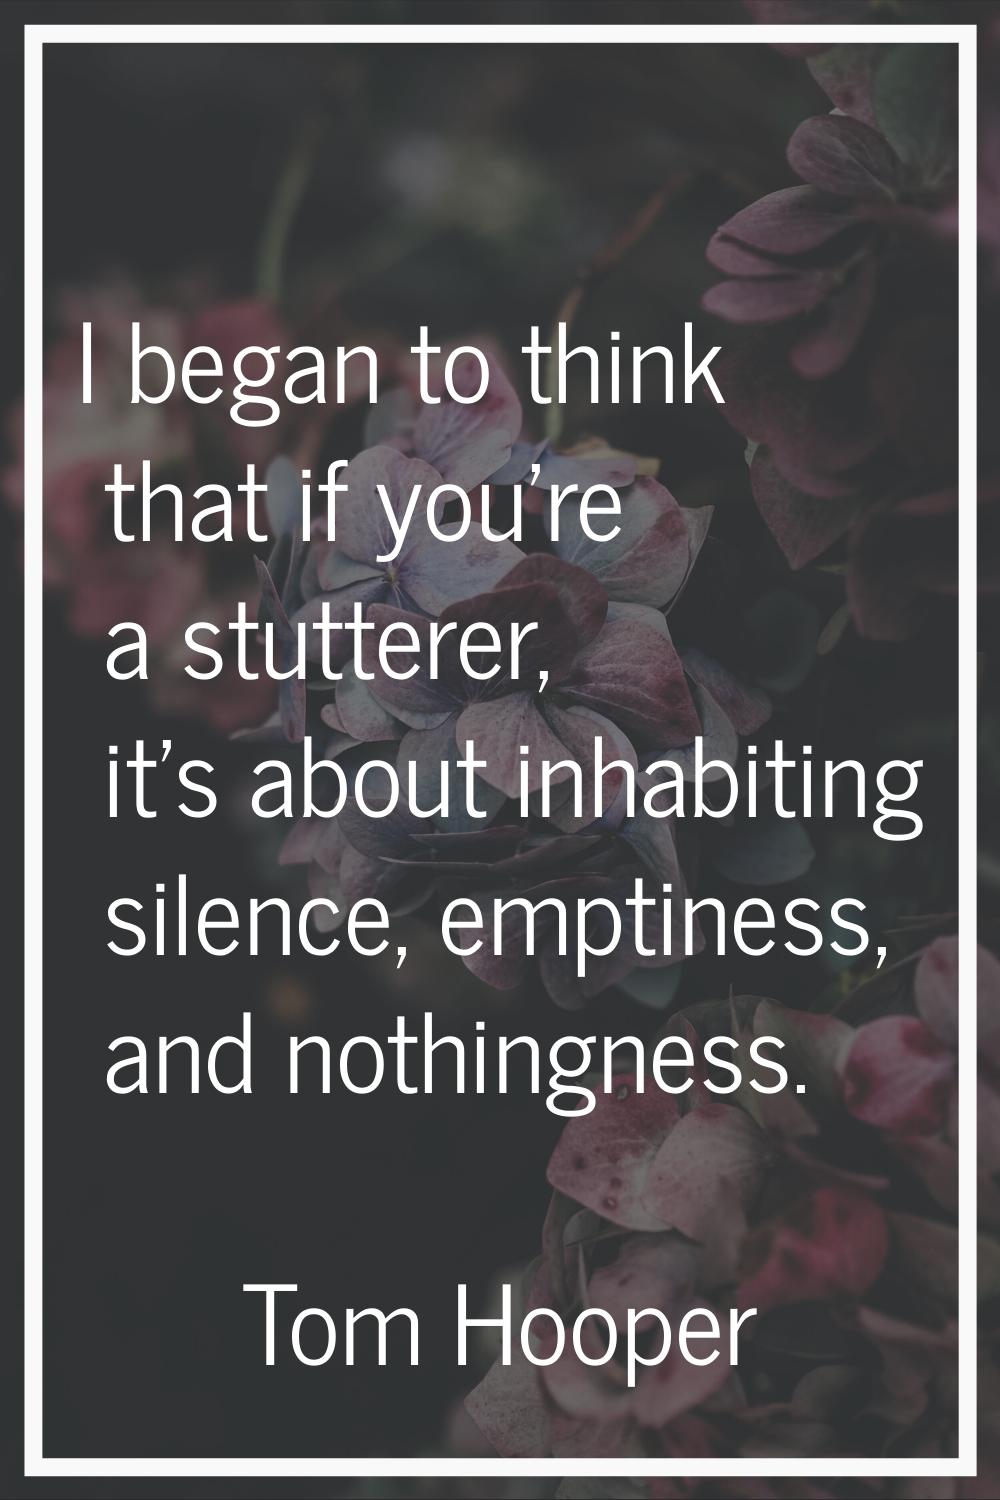 I began to think that if you're a stutterer, it's about inhabiting silence, emptiness, and nothingn